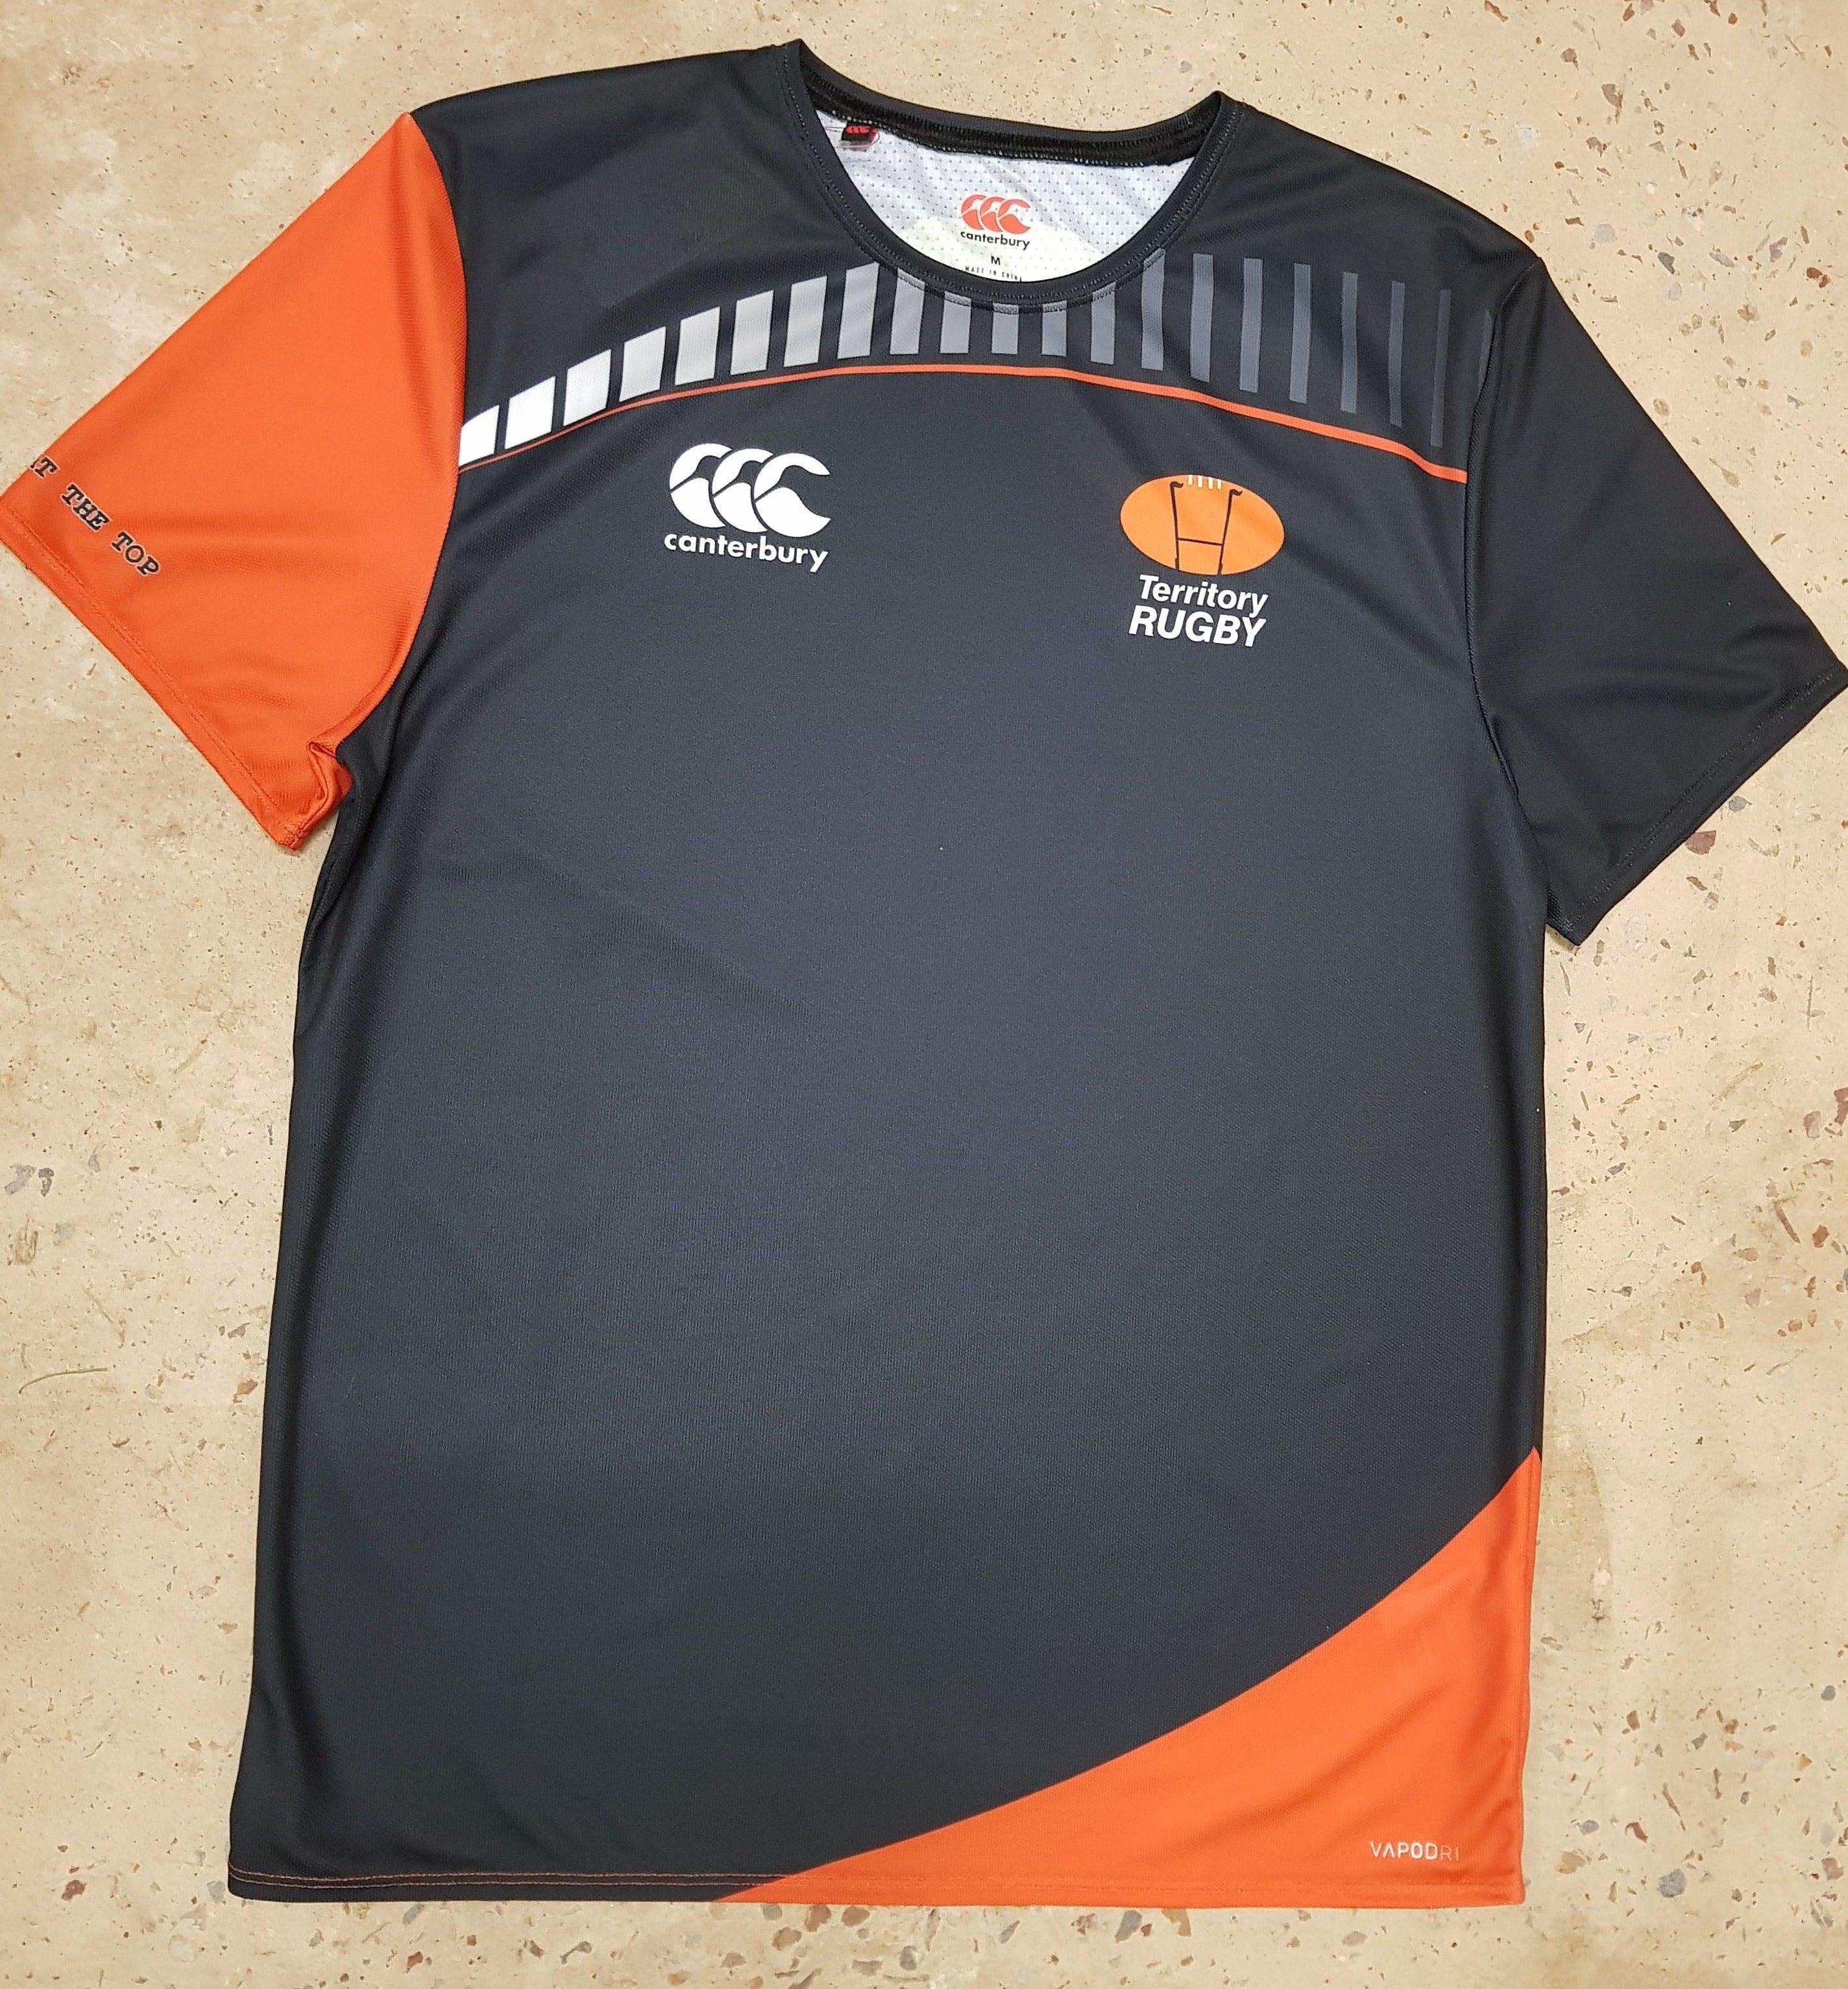 Territory Rugby Tee - The Rugby Shop Darwin